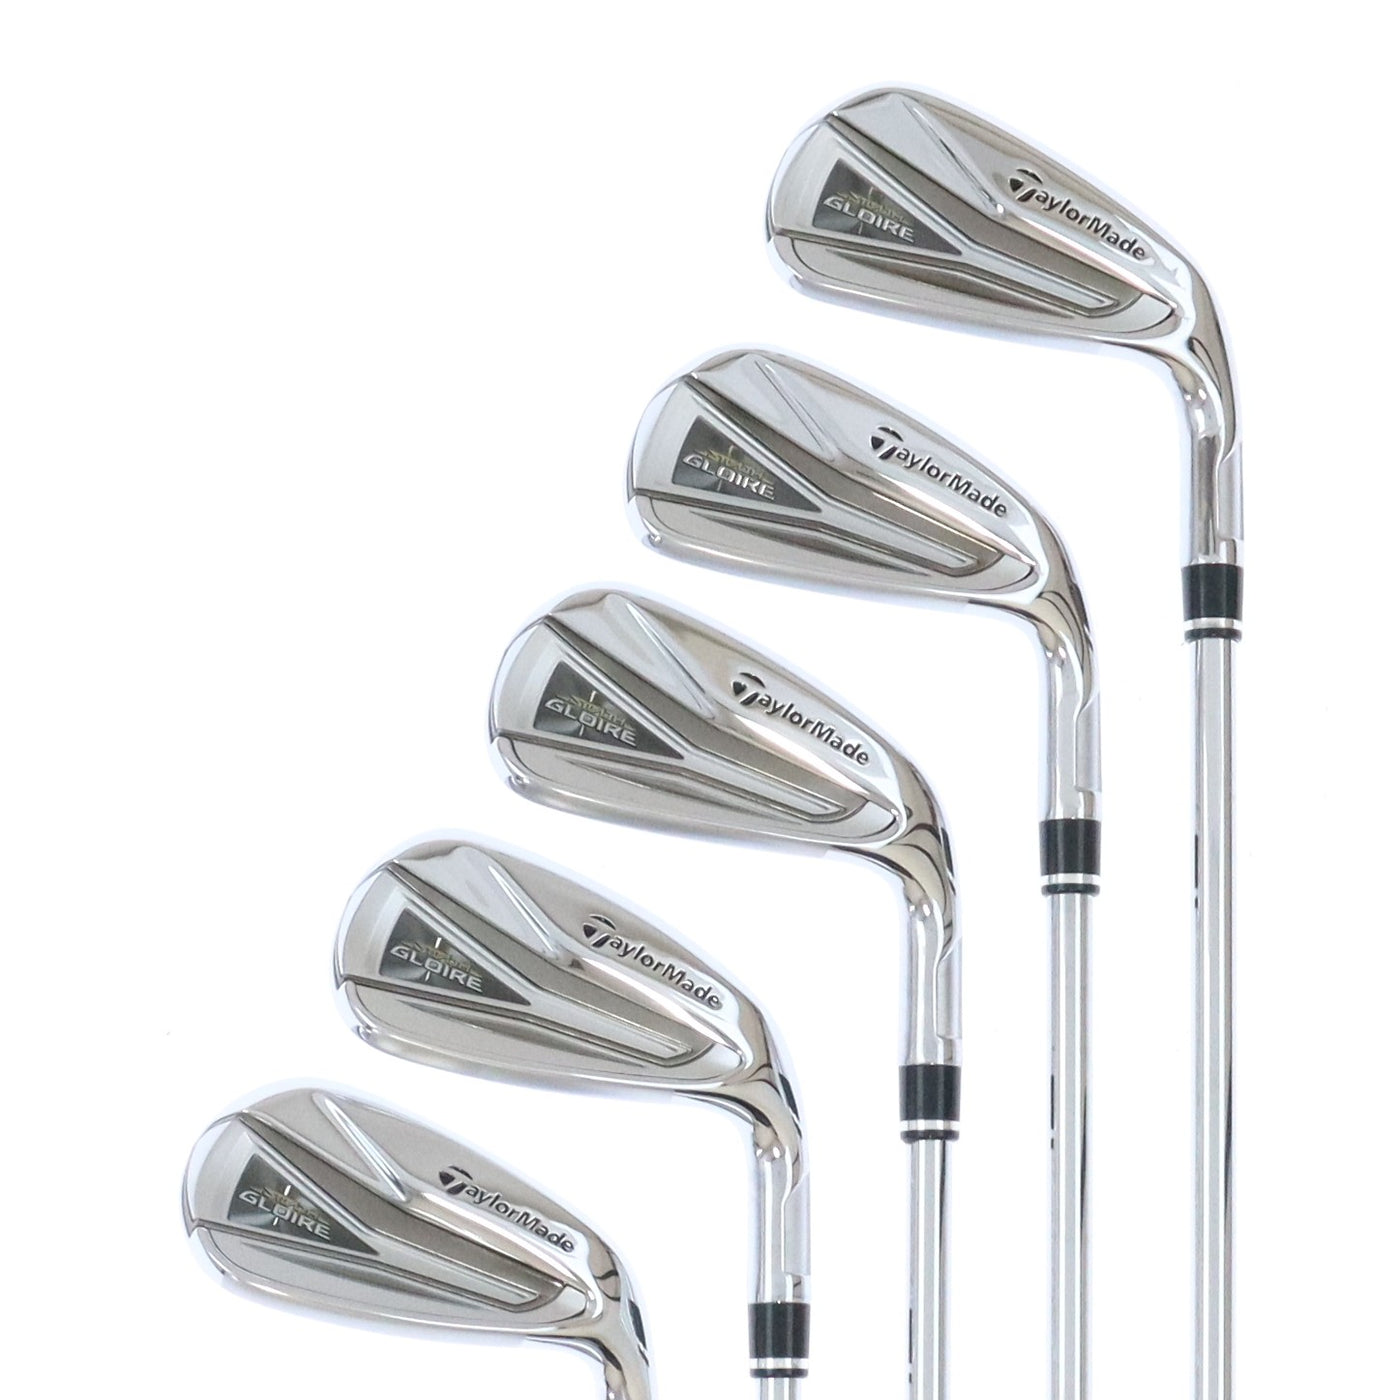 TaylorMade Iron Set Open Box STEALTH GLOIRE Stiff NS PRO 790GH 5 pieces